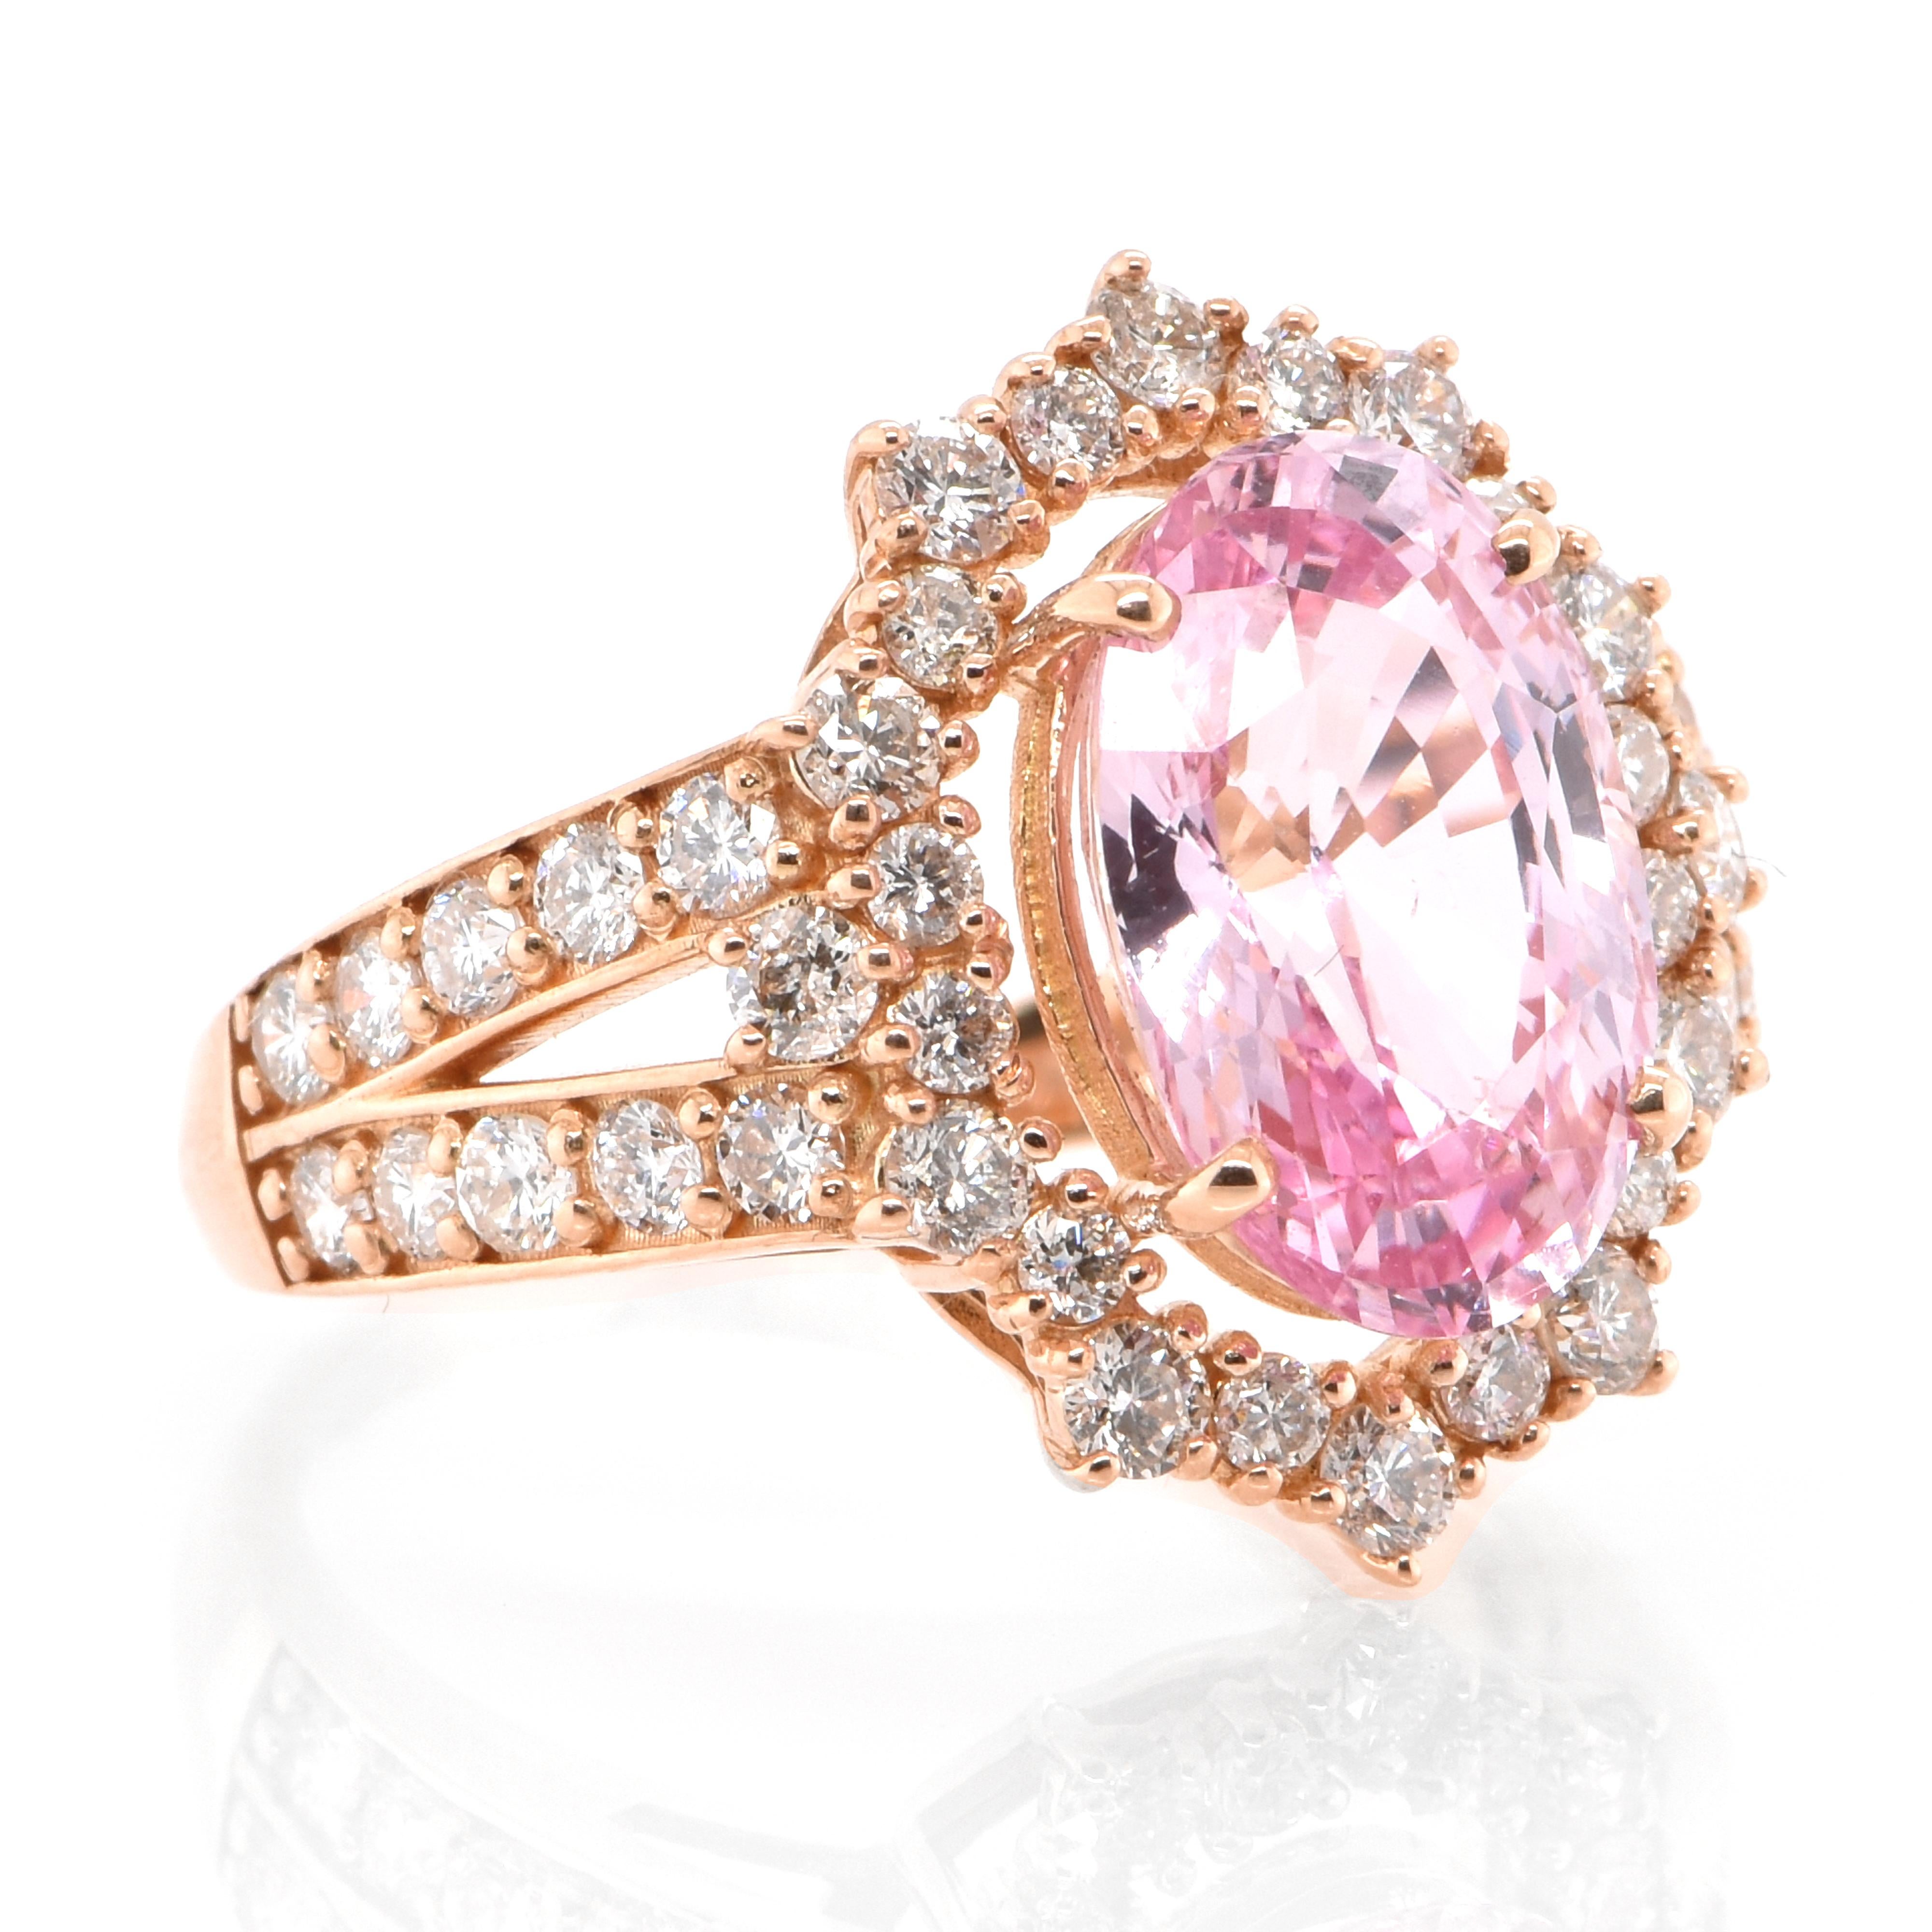 A beautiful ring featuring AIGS Certified 5.092 Carat Natural Padparadscha Sapphire and 1.30 Carats Diamond Accents set in Platinum. Sapphires have extraordinary durability - they excel in hardness as well as toughness and durability making them